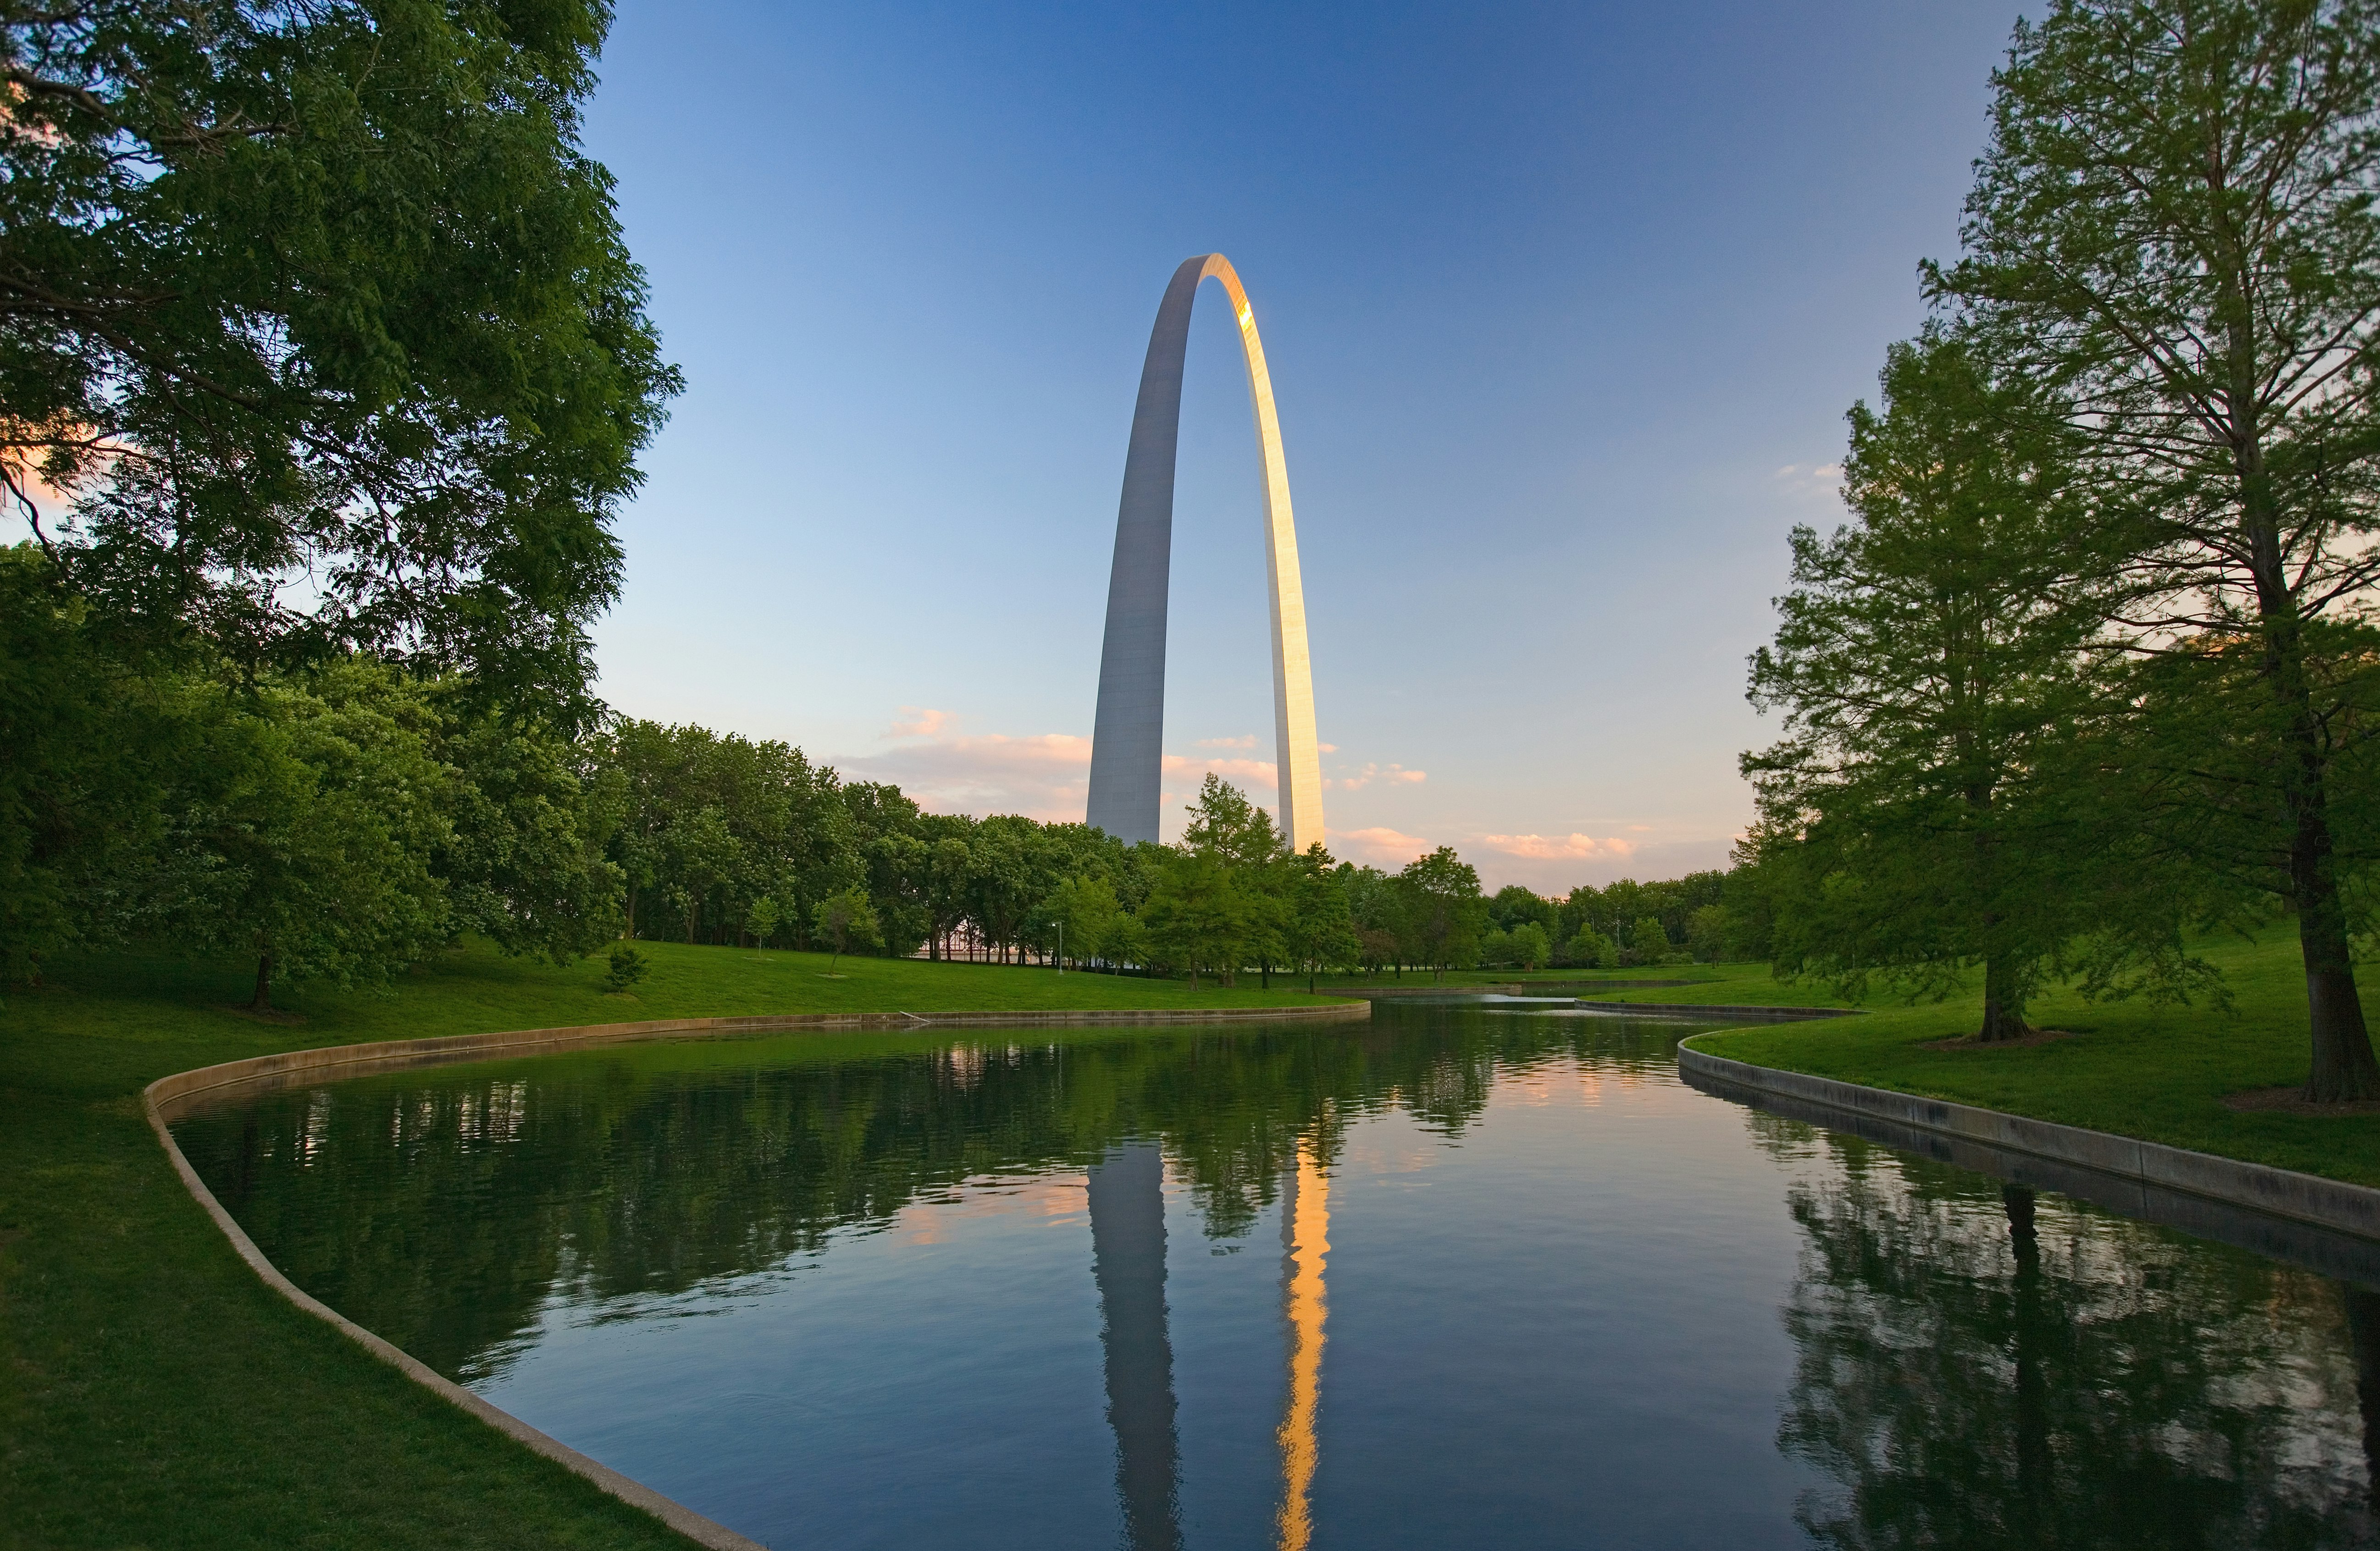 The silver expanse of the Gateway Arch is seen almost in profile, the closest end catching the bright warmth of the afternoon sun. The foreground of the image is dominated by a blue body of water flanked by a bright green lawn and green, shady trees.